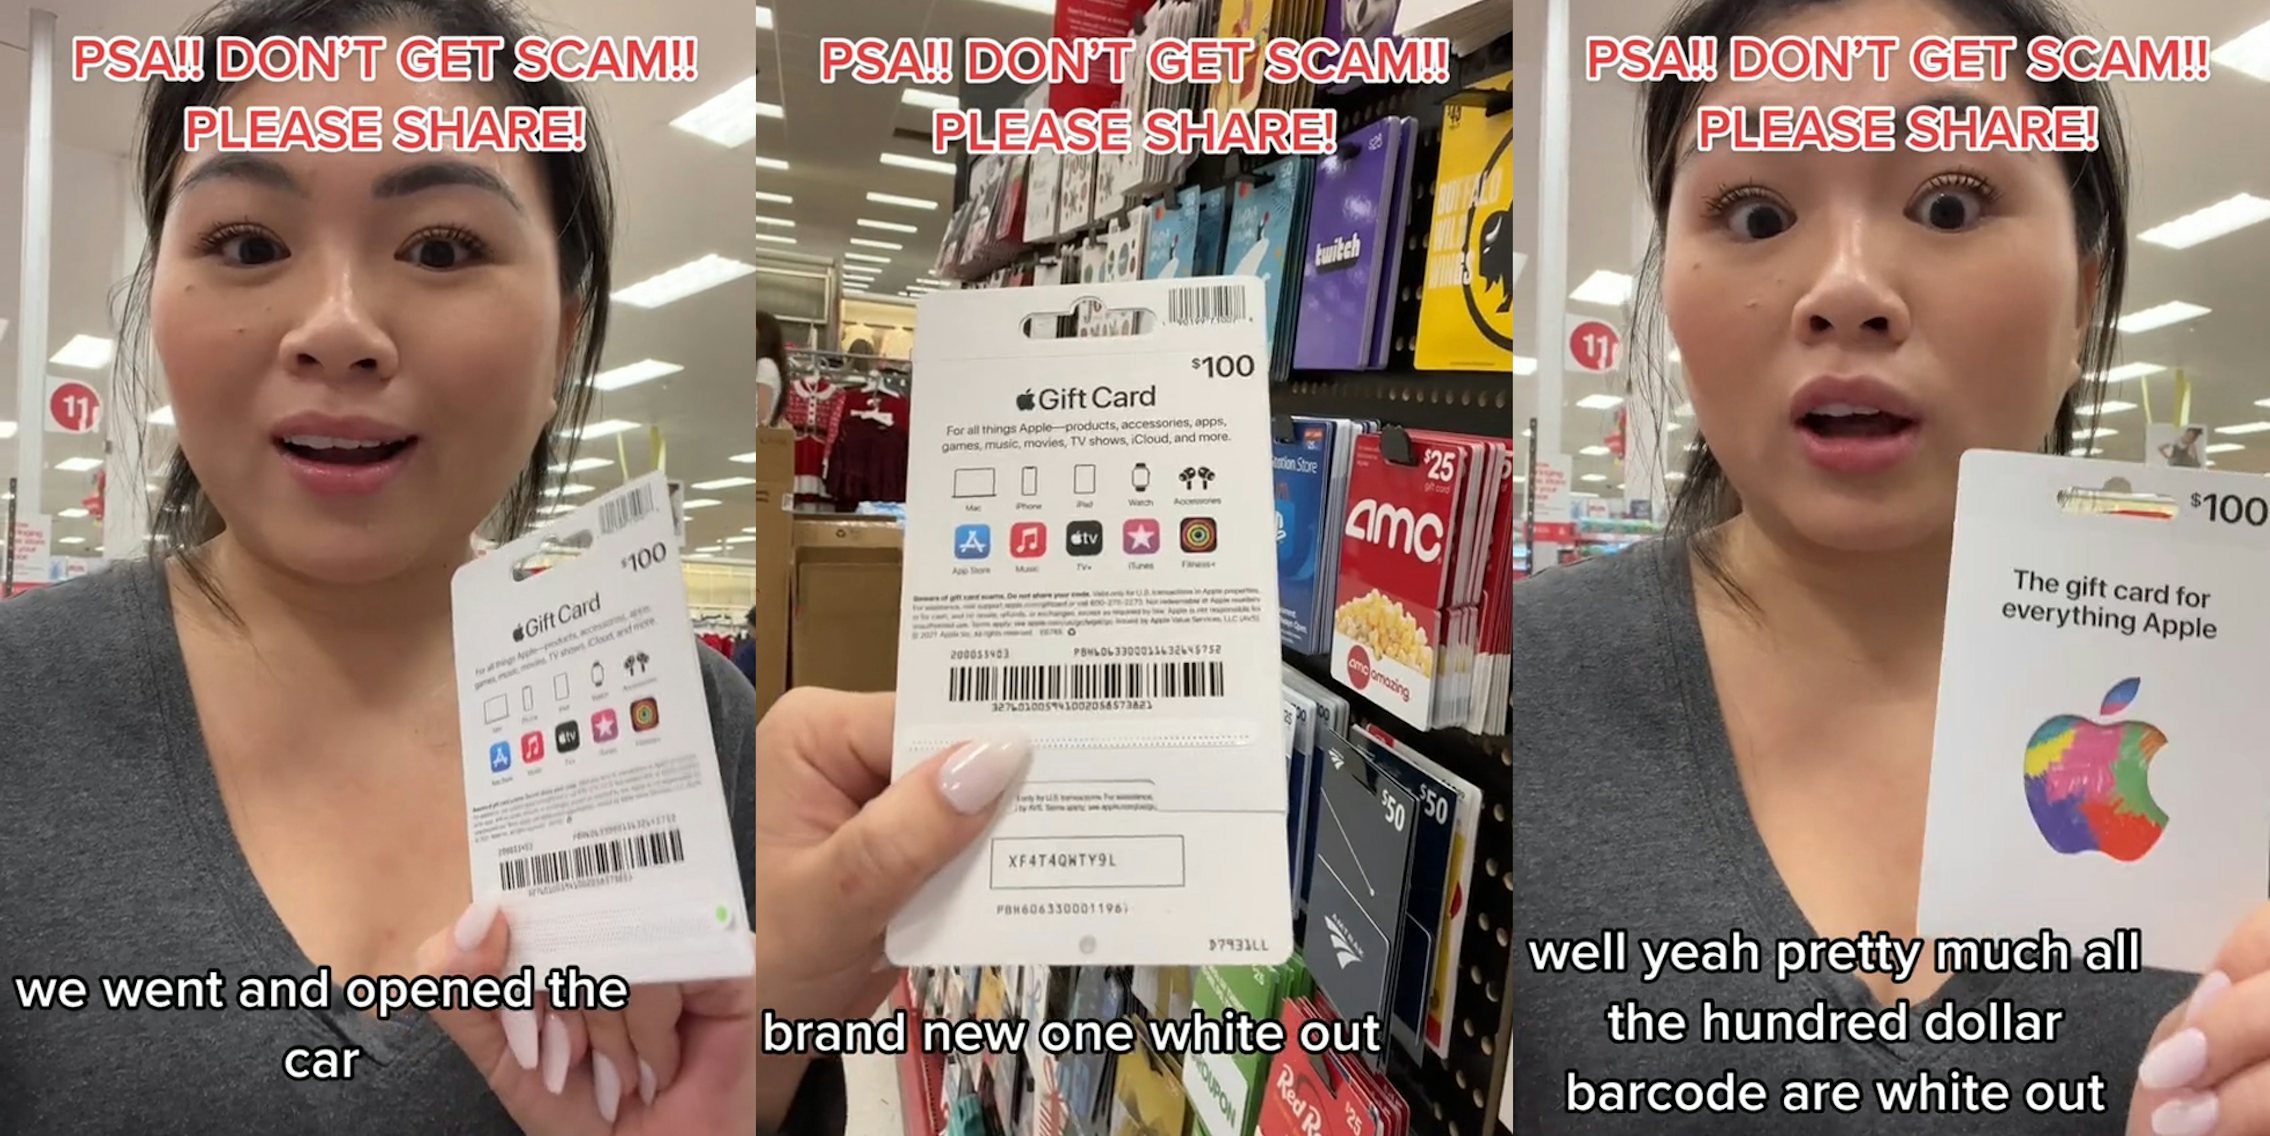 Found Apple Gift Cards at Home Depot tampered with. Beware! : r